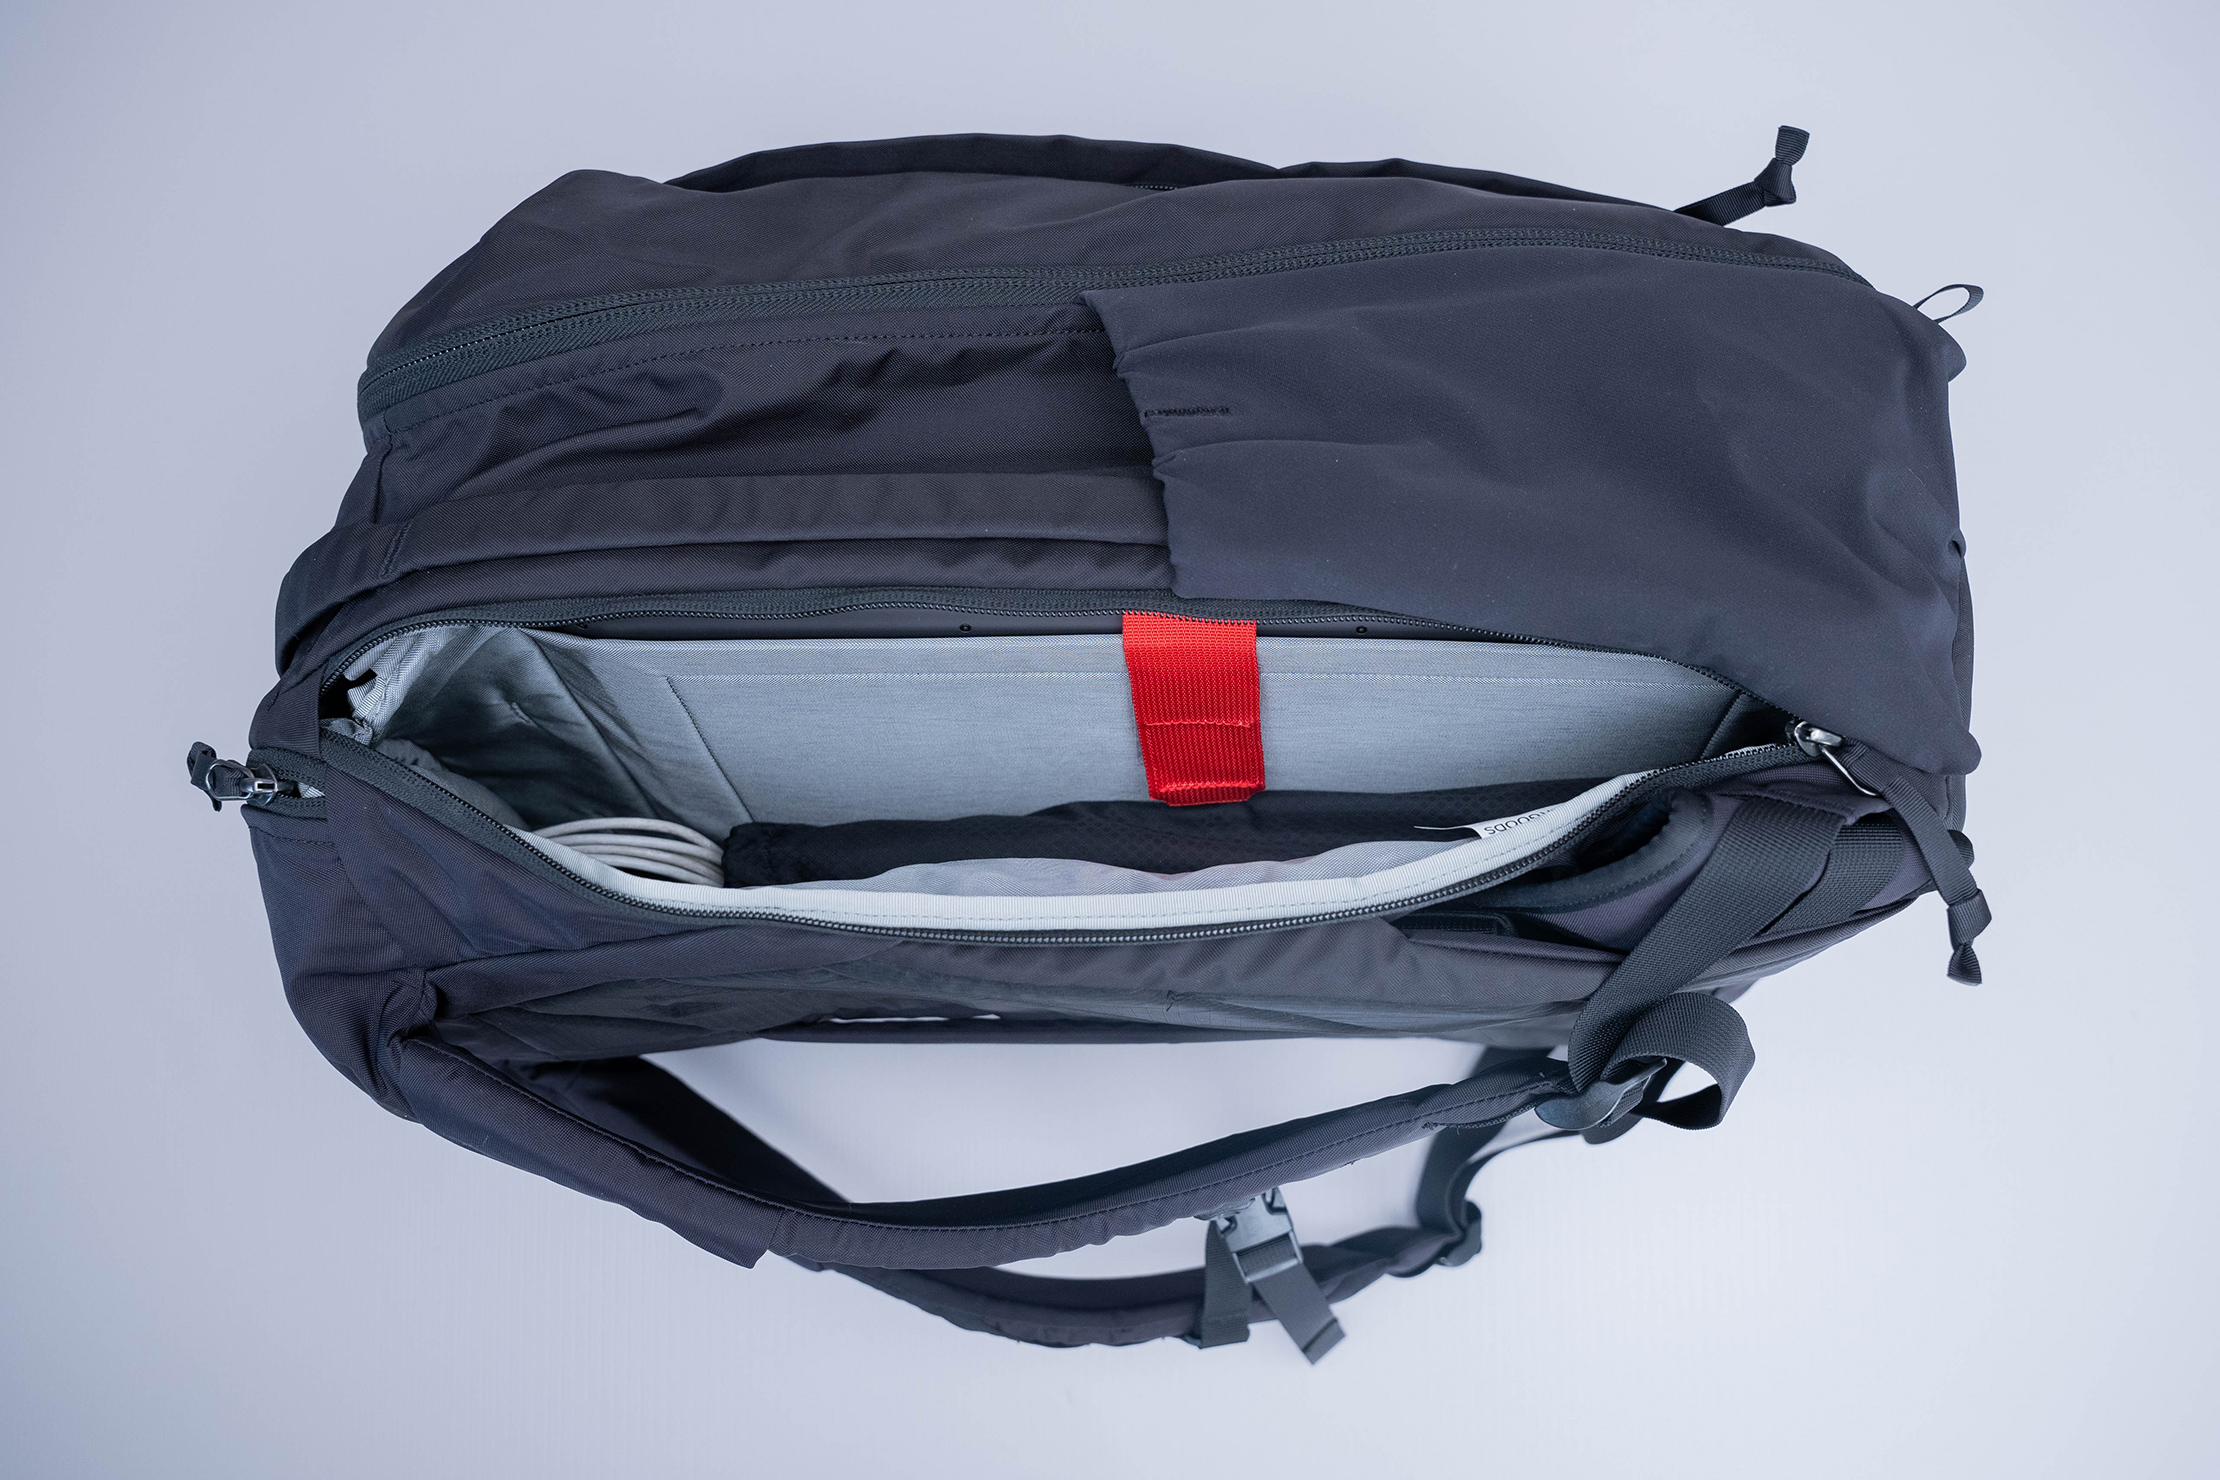 EVERGOODS Civic Travel Bag 35L (CTB35) Side Compartment